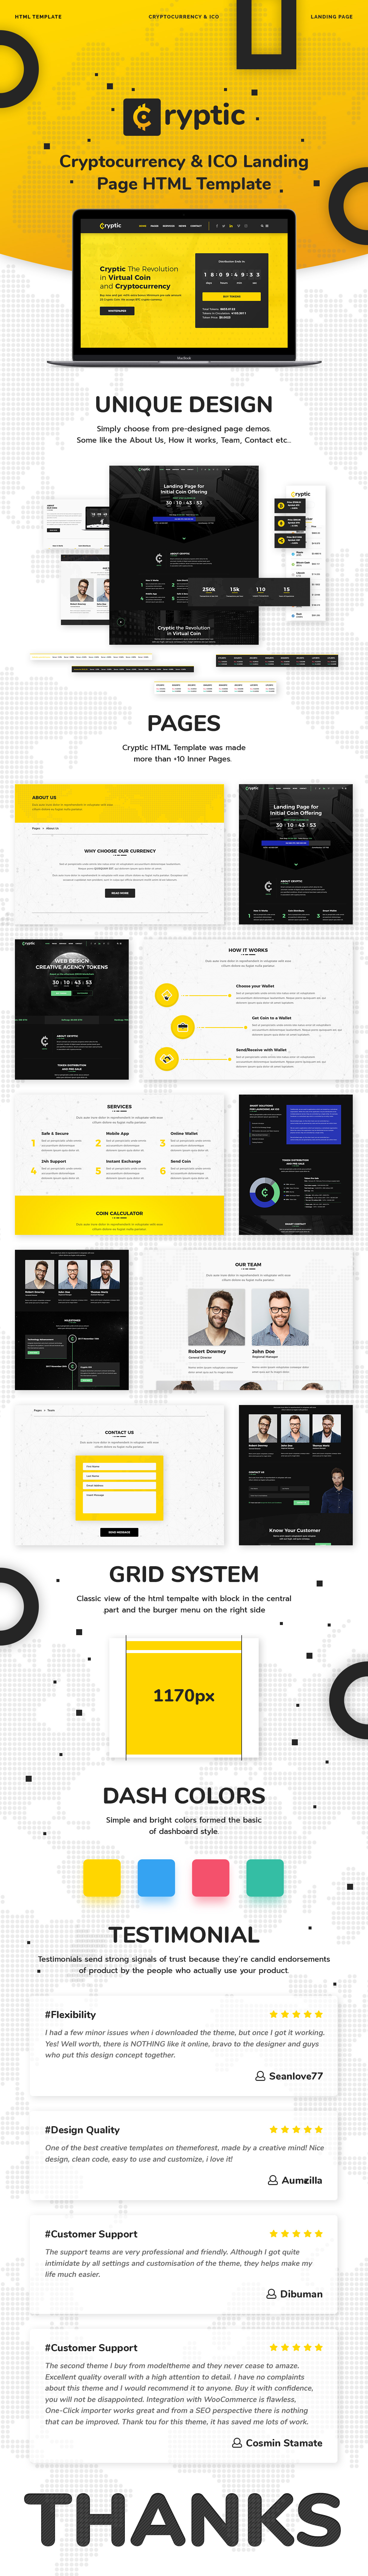 Cryptic - Cryptocurrency & ICO Landing Page HTML Template - 5